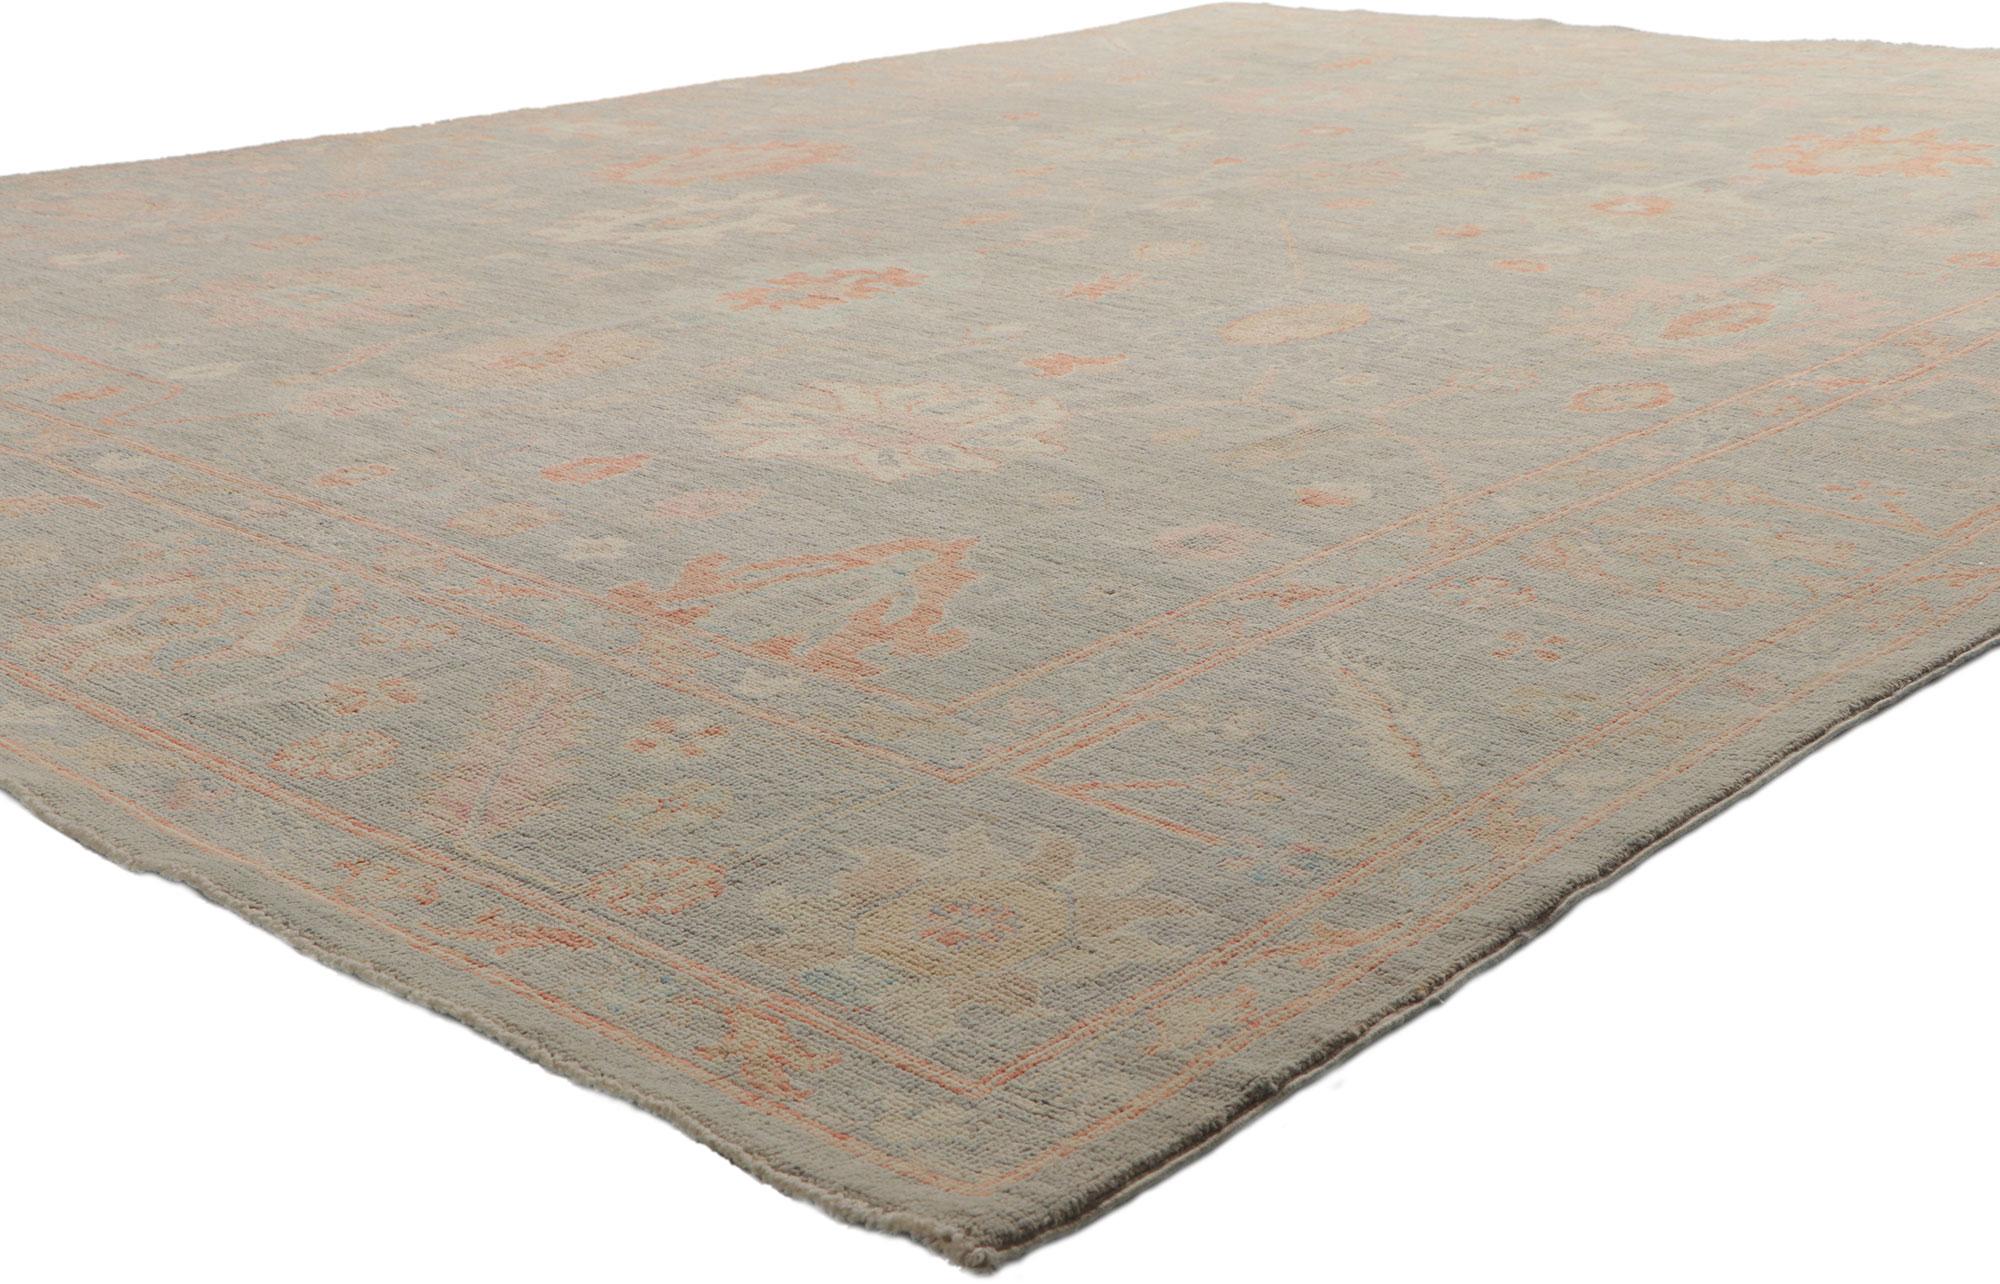 80913 Vintage-Inspired Muted Oushak Rug, 08'10 x 12'00.
Nostalgic charm meets effortless beauty in this vintage-style muted Oushak rug. The faded botanical design and soft pastel earth-tone colors woven into this piece work together creating an